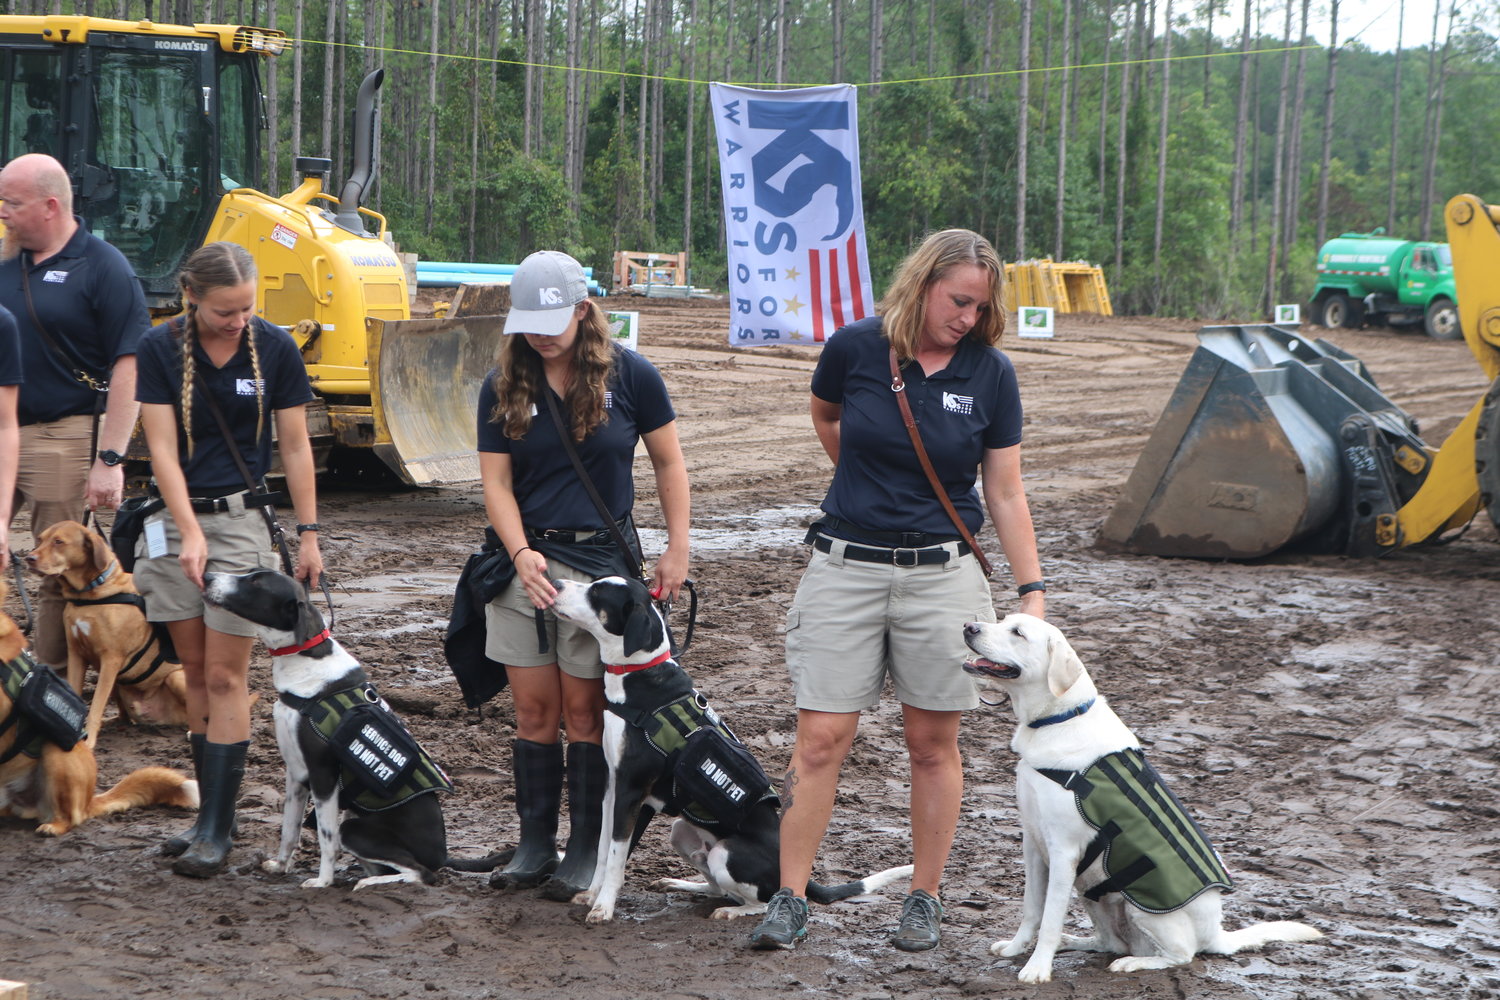 K9s in the program were on hand with their trainers during the ceremony. The new training facility will be able to house roughly 150 dogs once built.